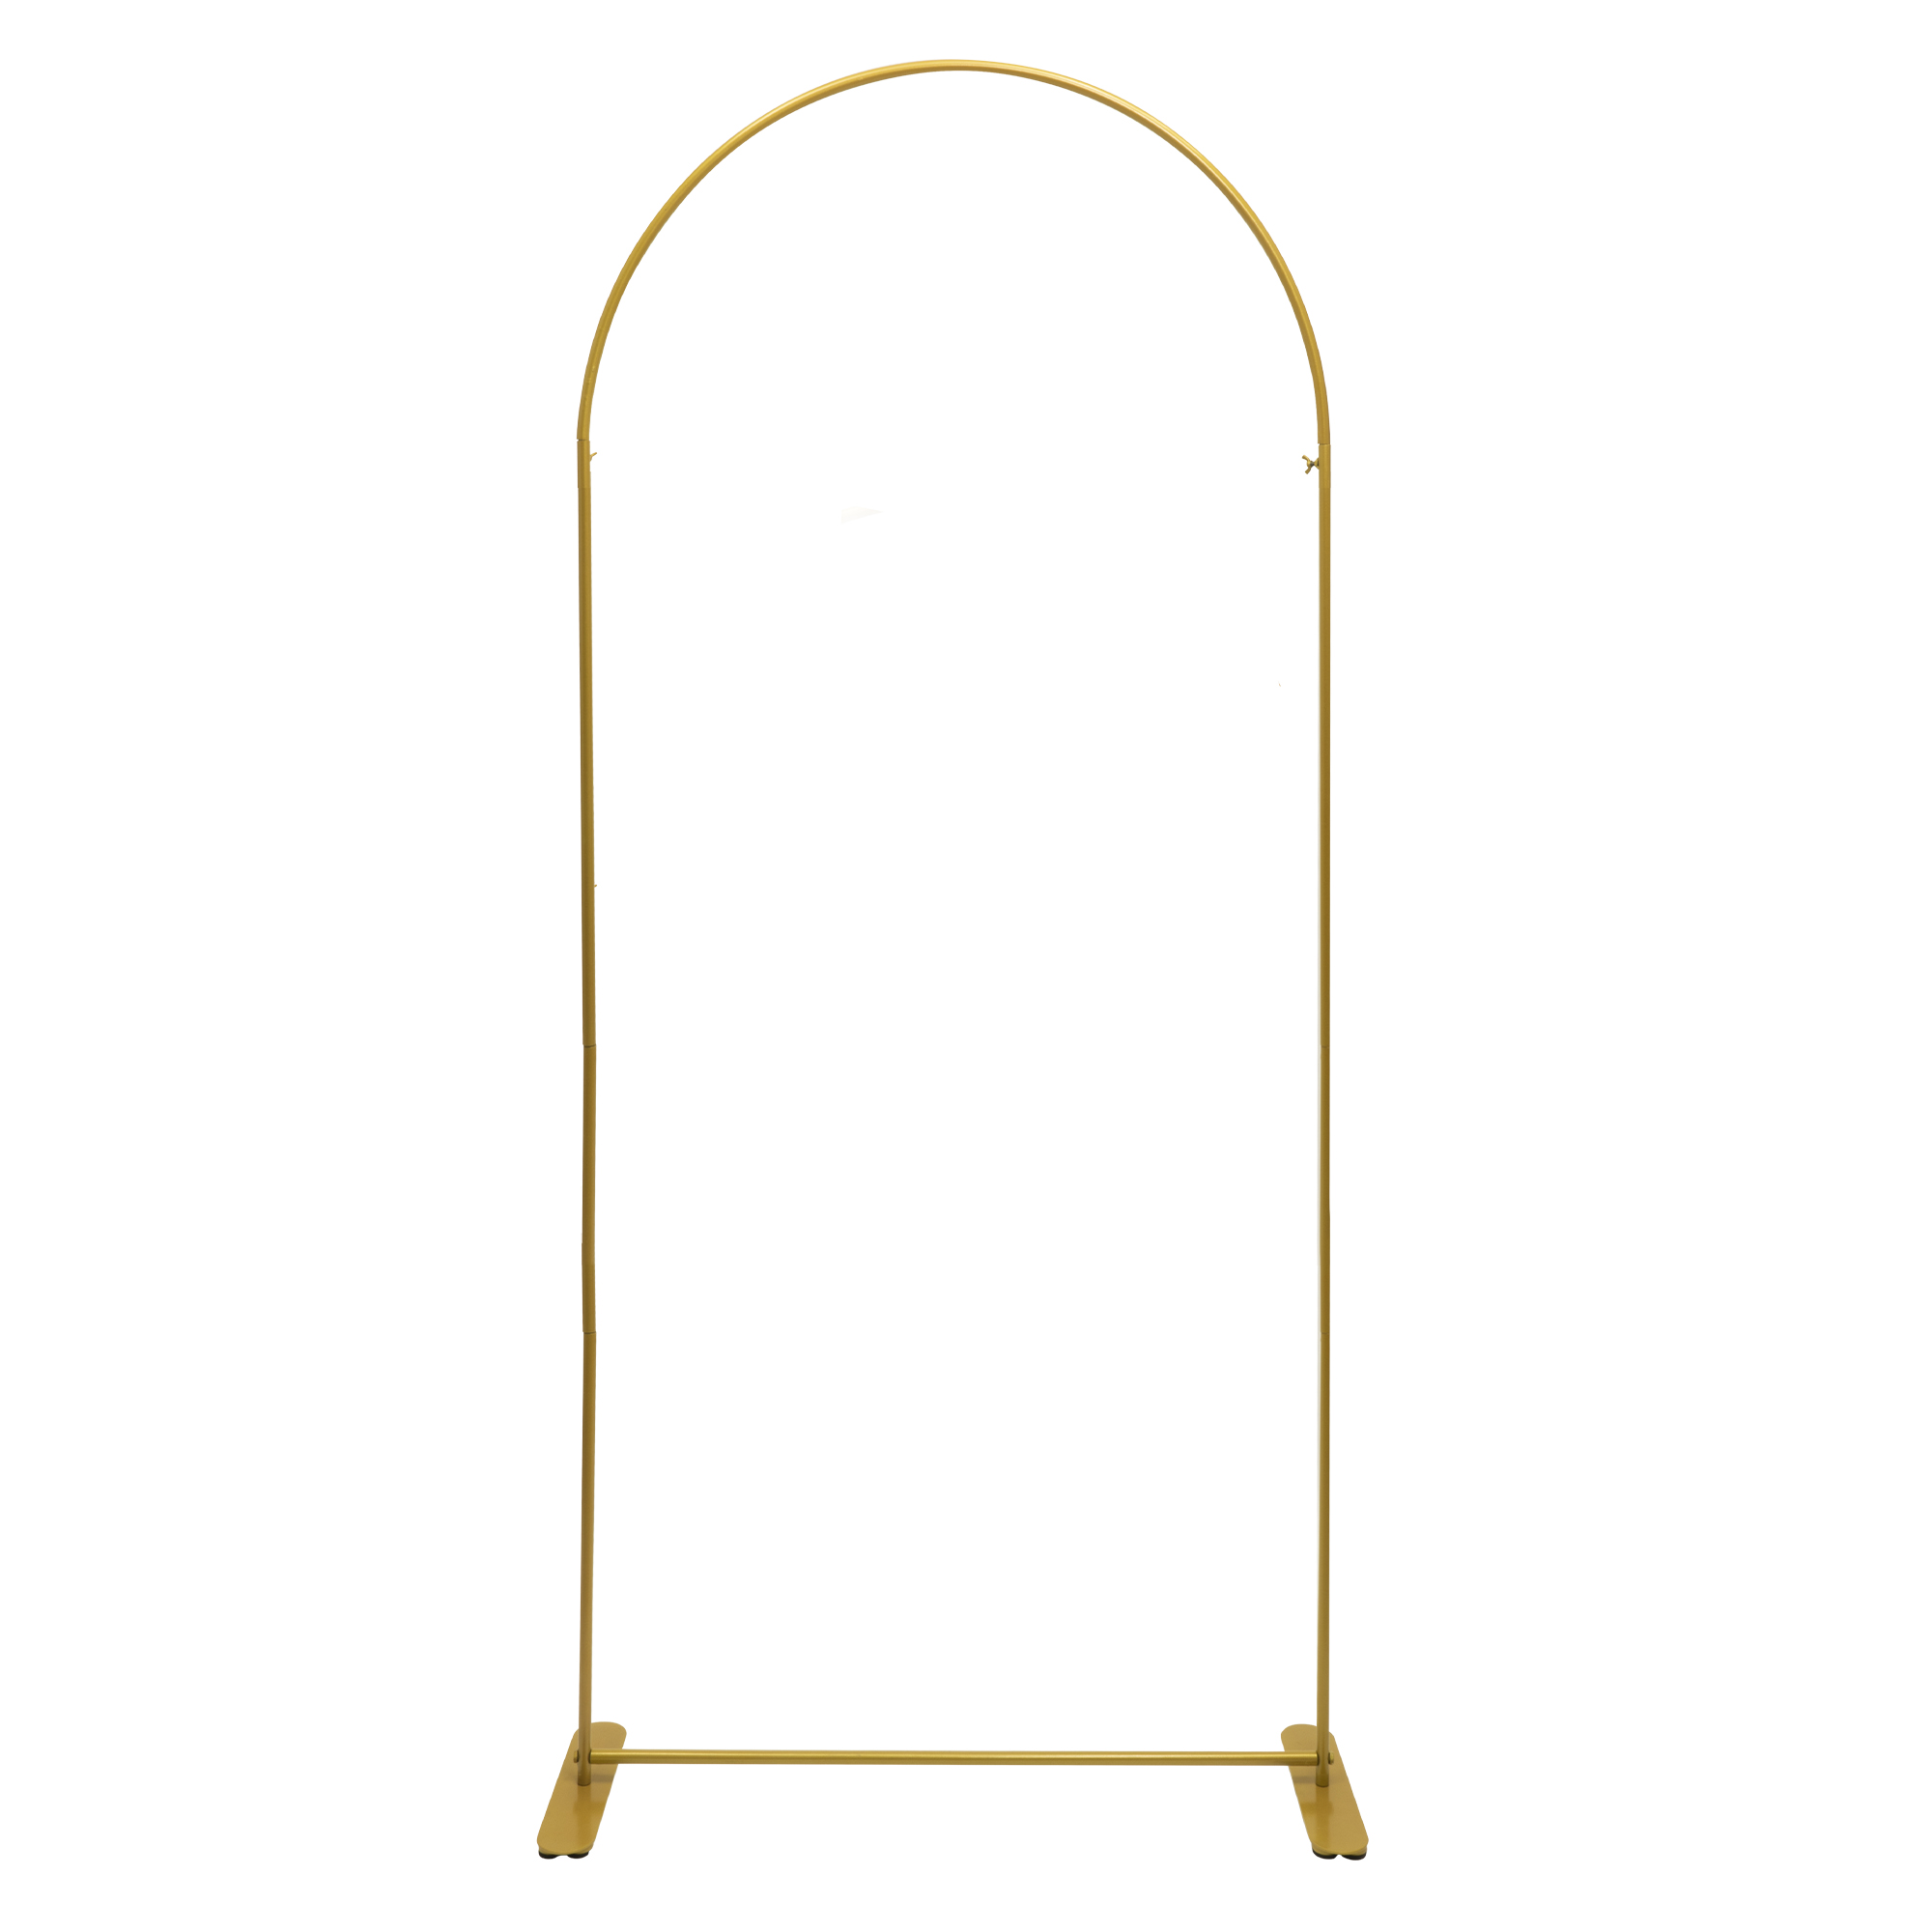 Metal Arch Backdrop Stand 36" x 90" - Gold